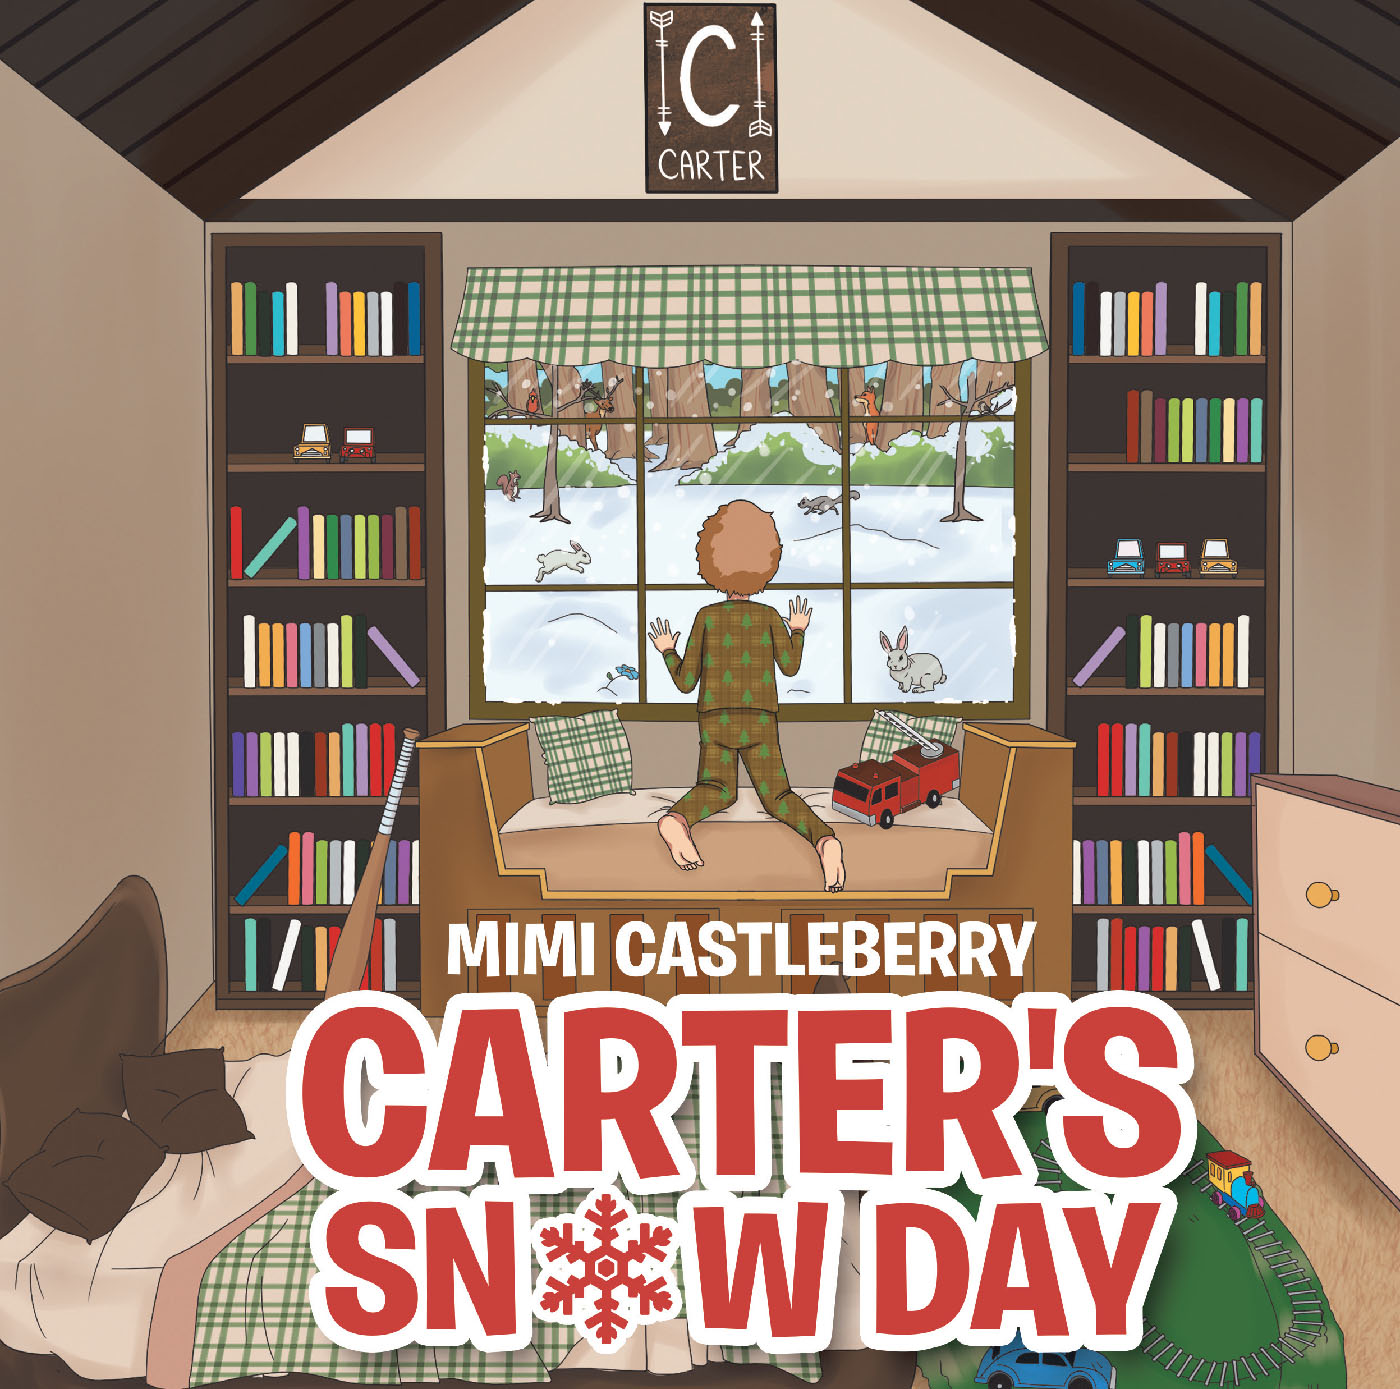 Carter's Snow Day Cover Image